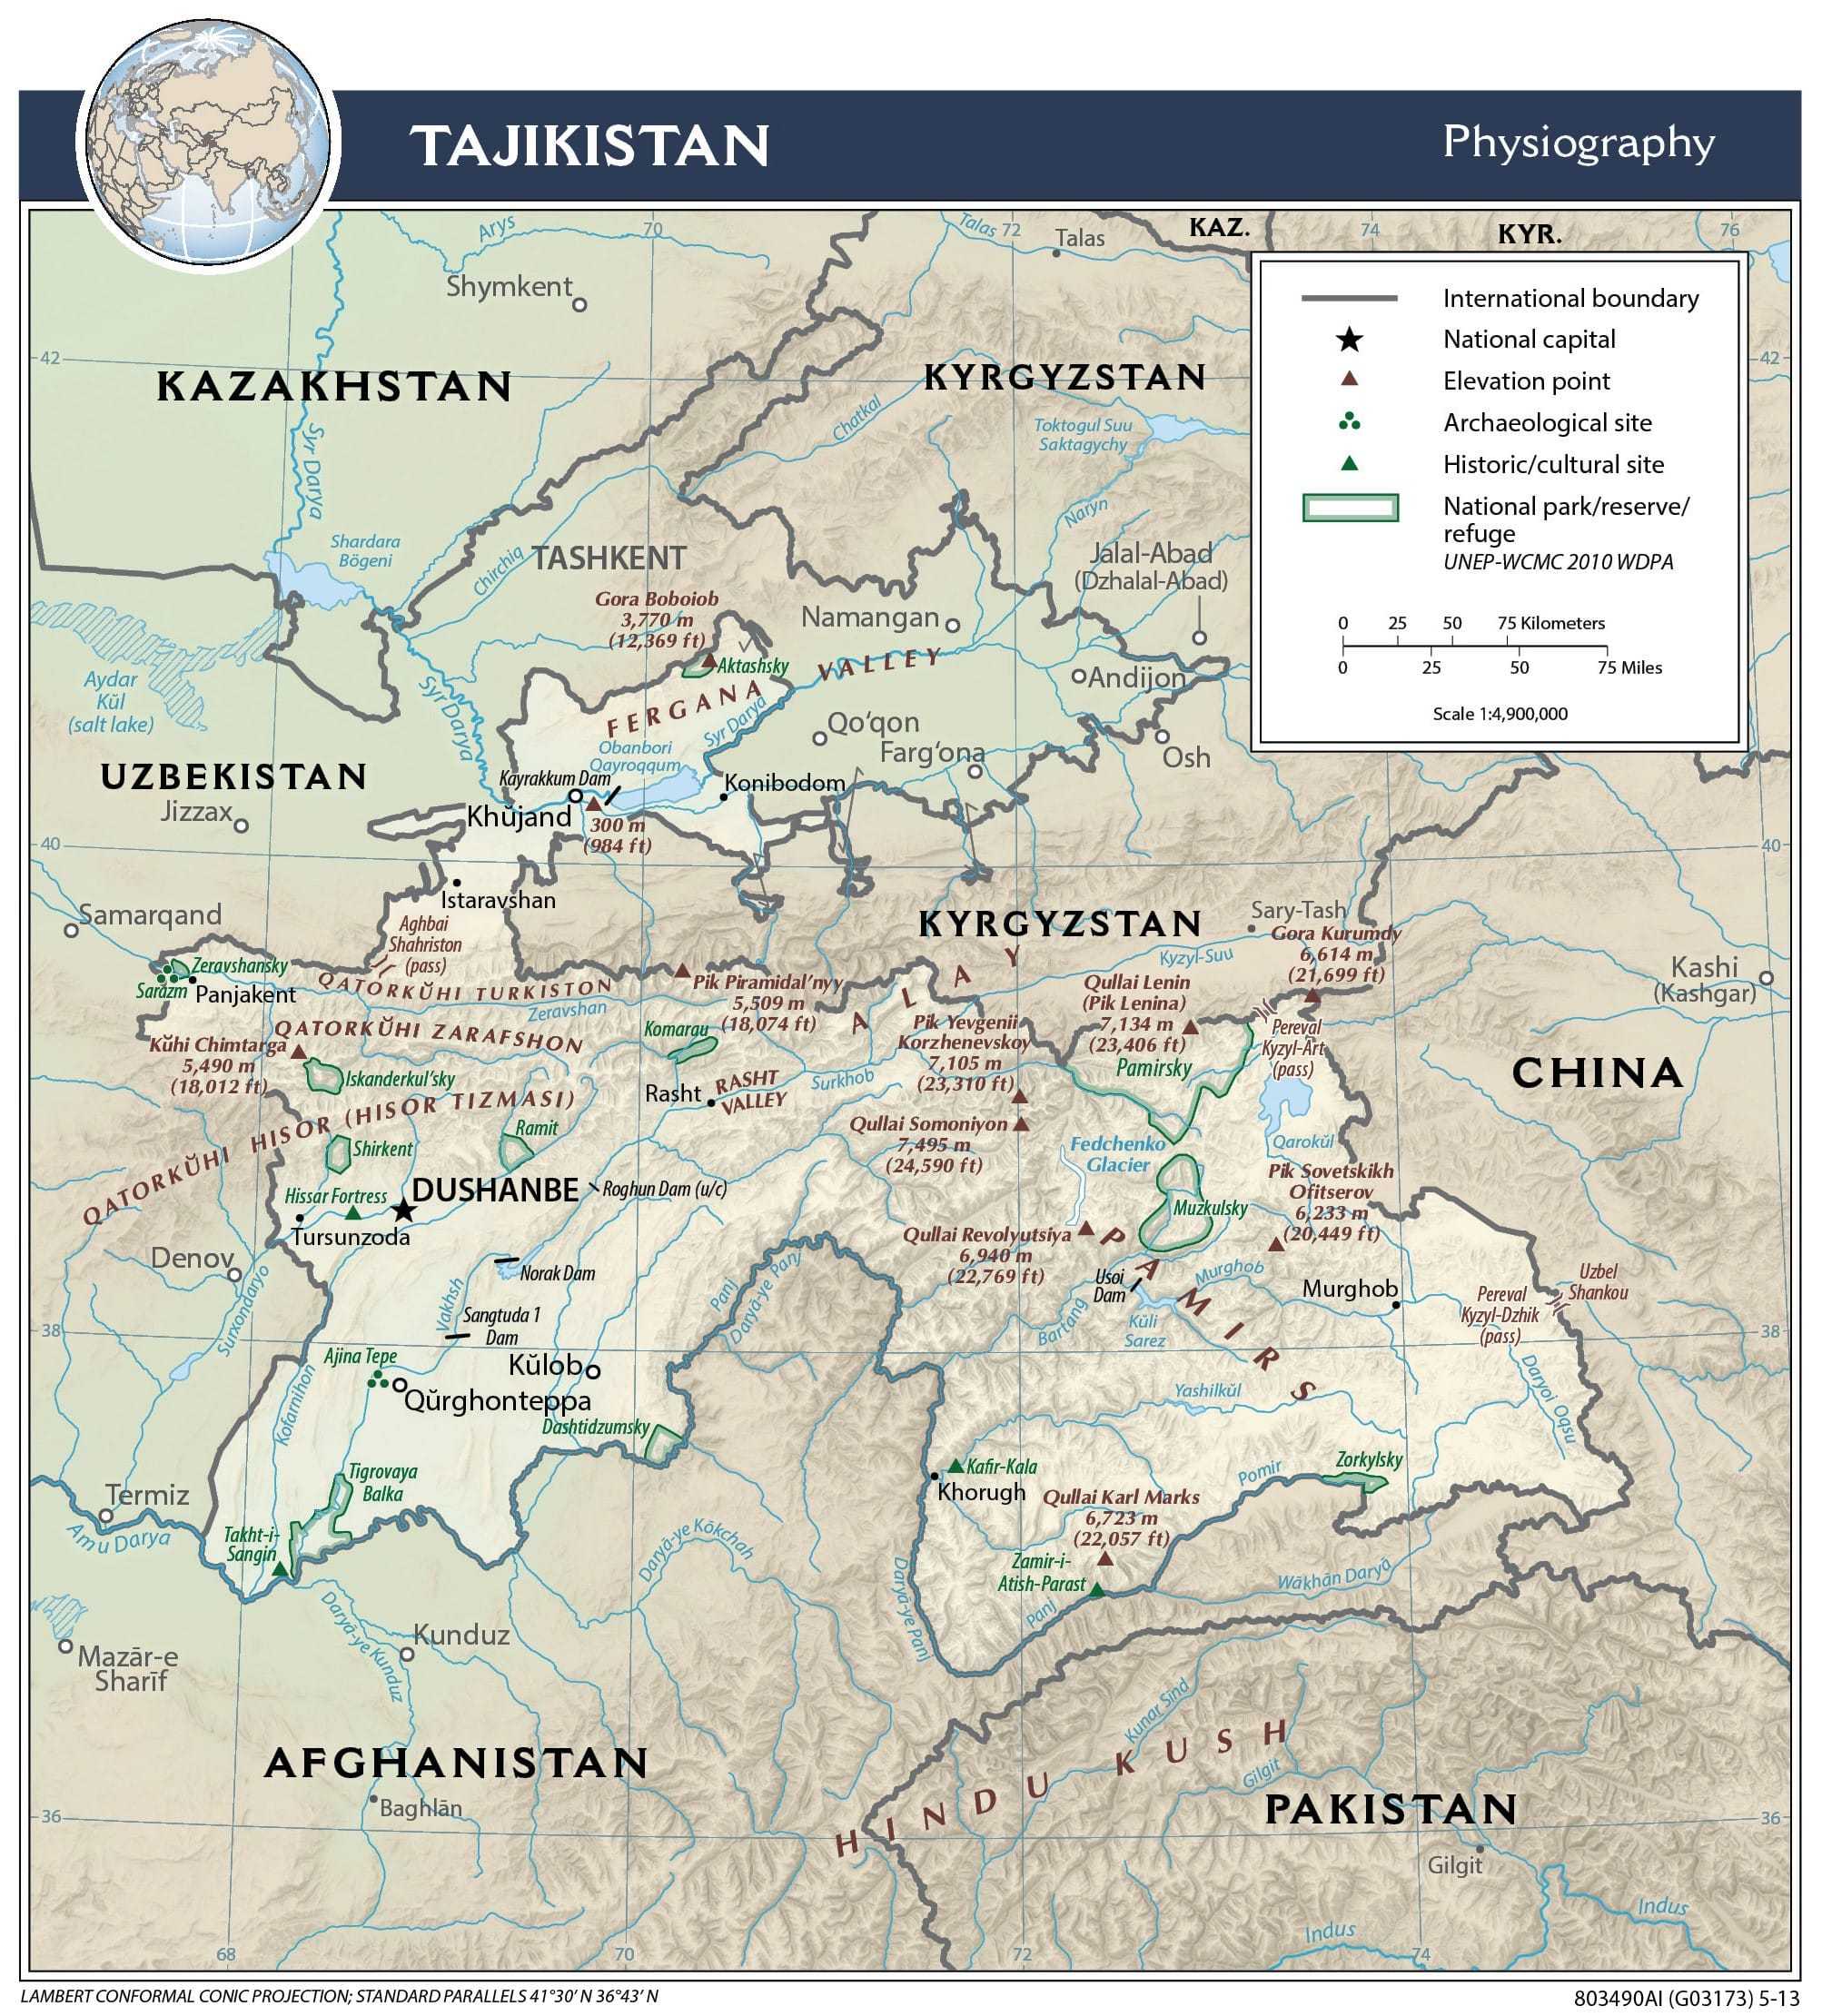 Physiographical map of Tajikistan.